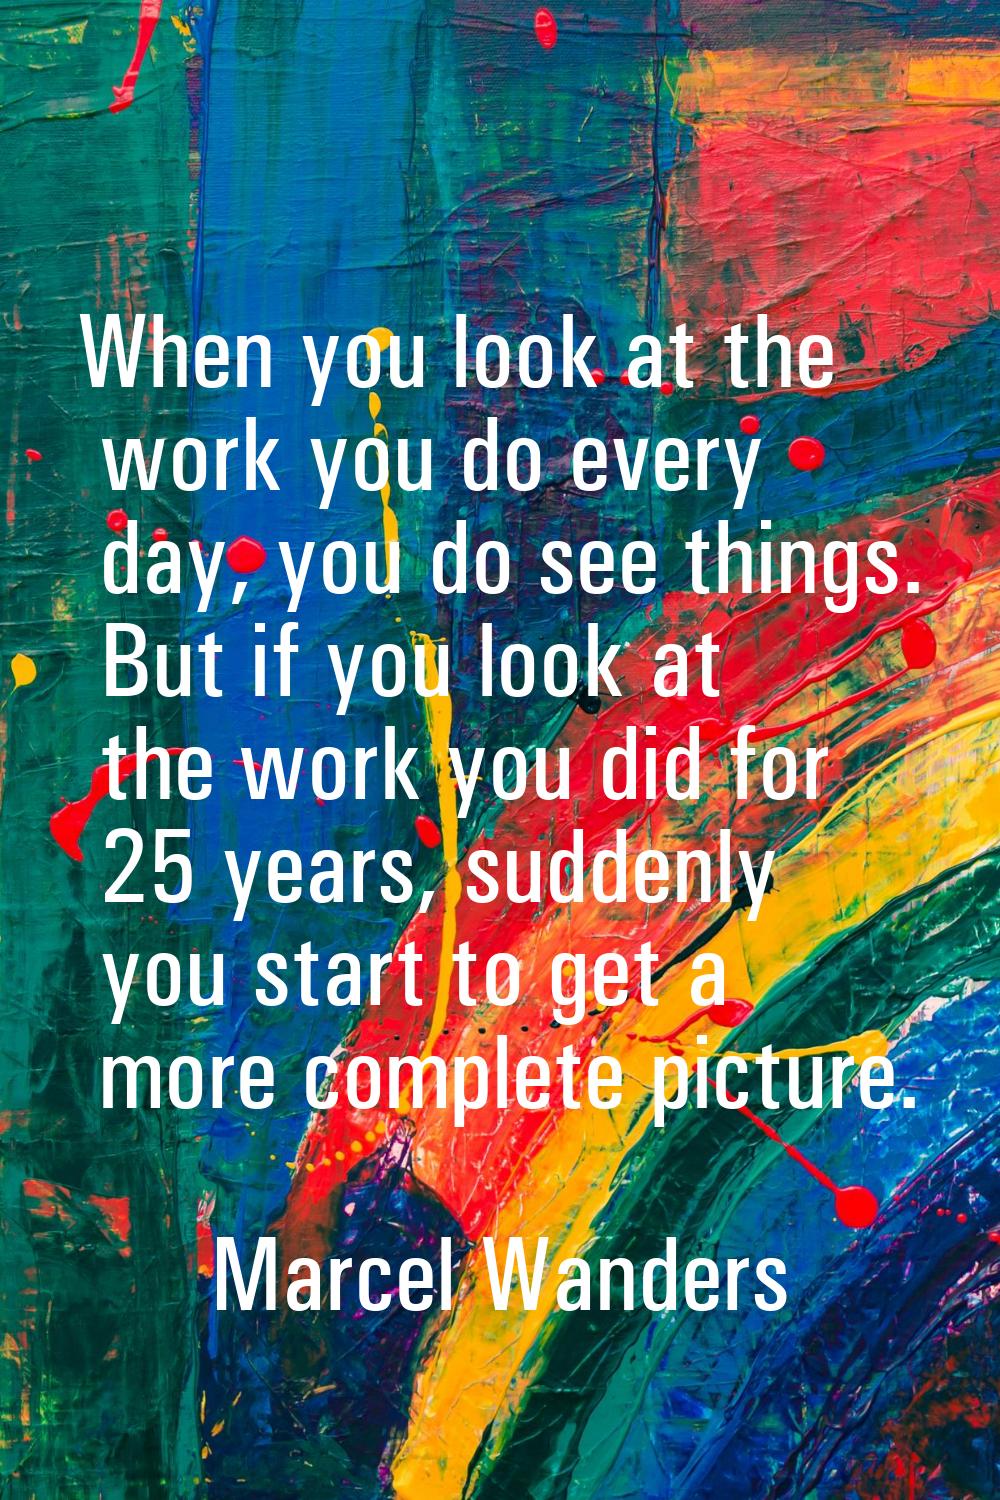 When you look at the work you do every day, you do see things. But if you look at the work you did 